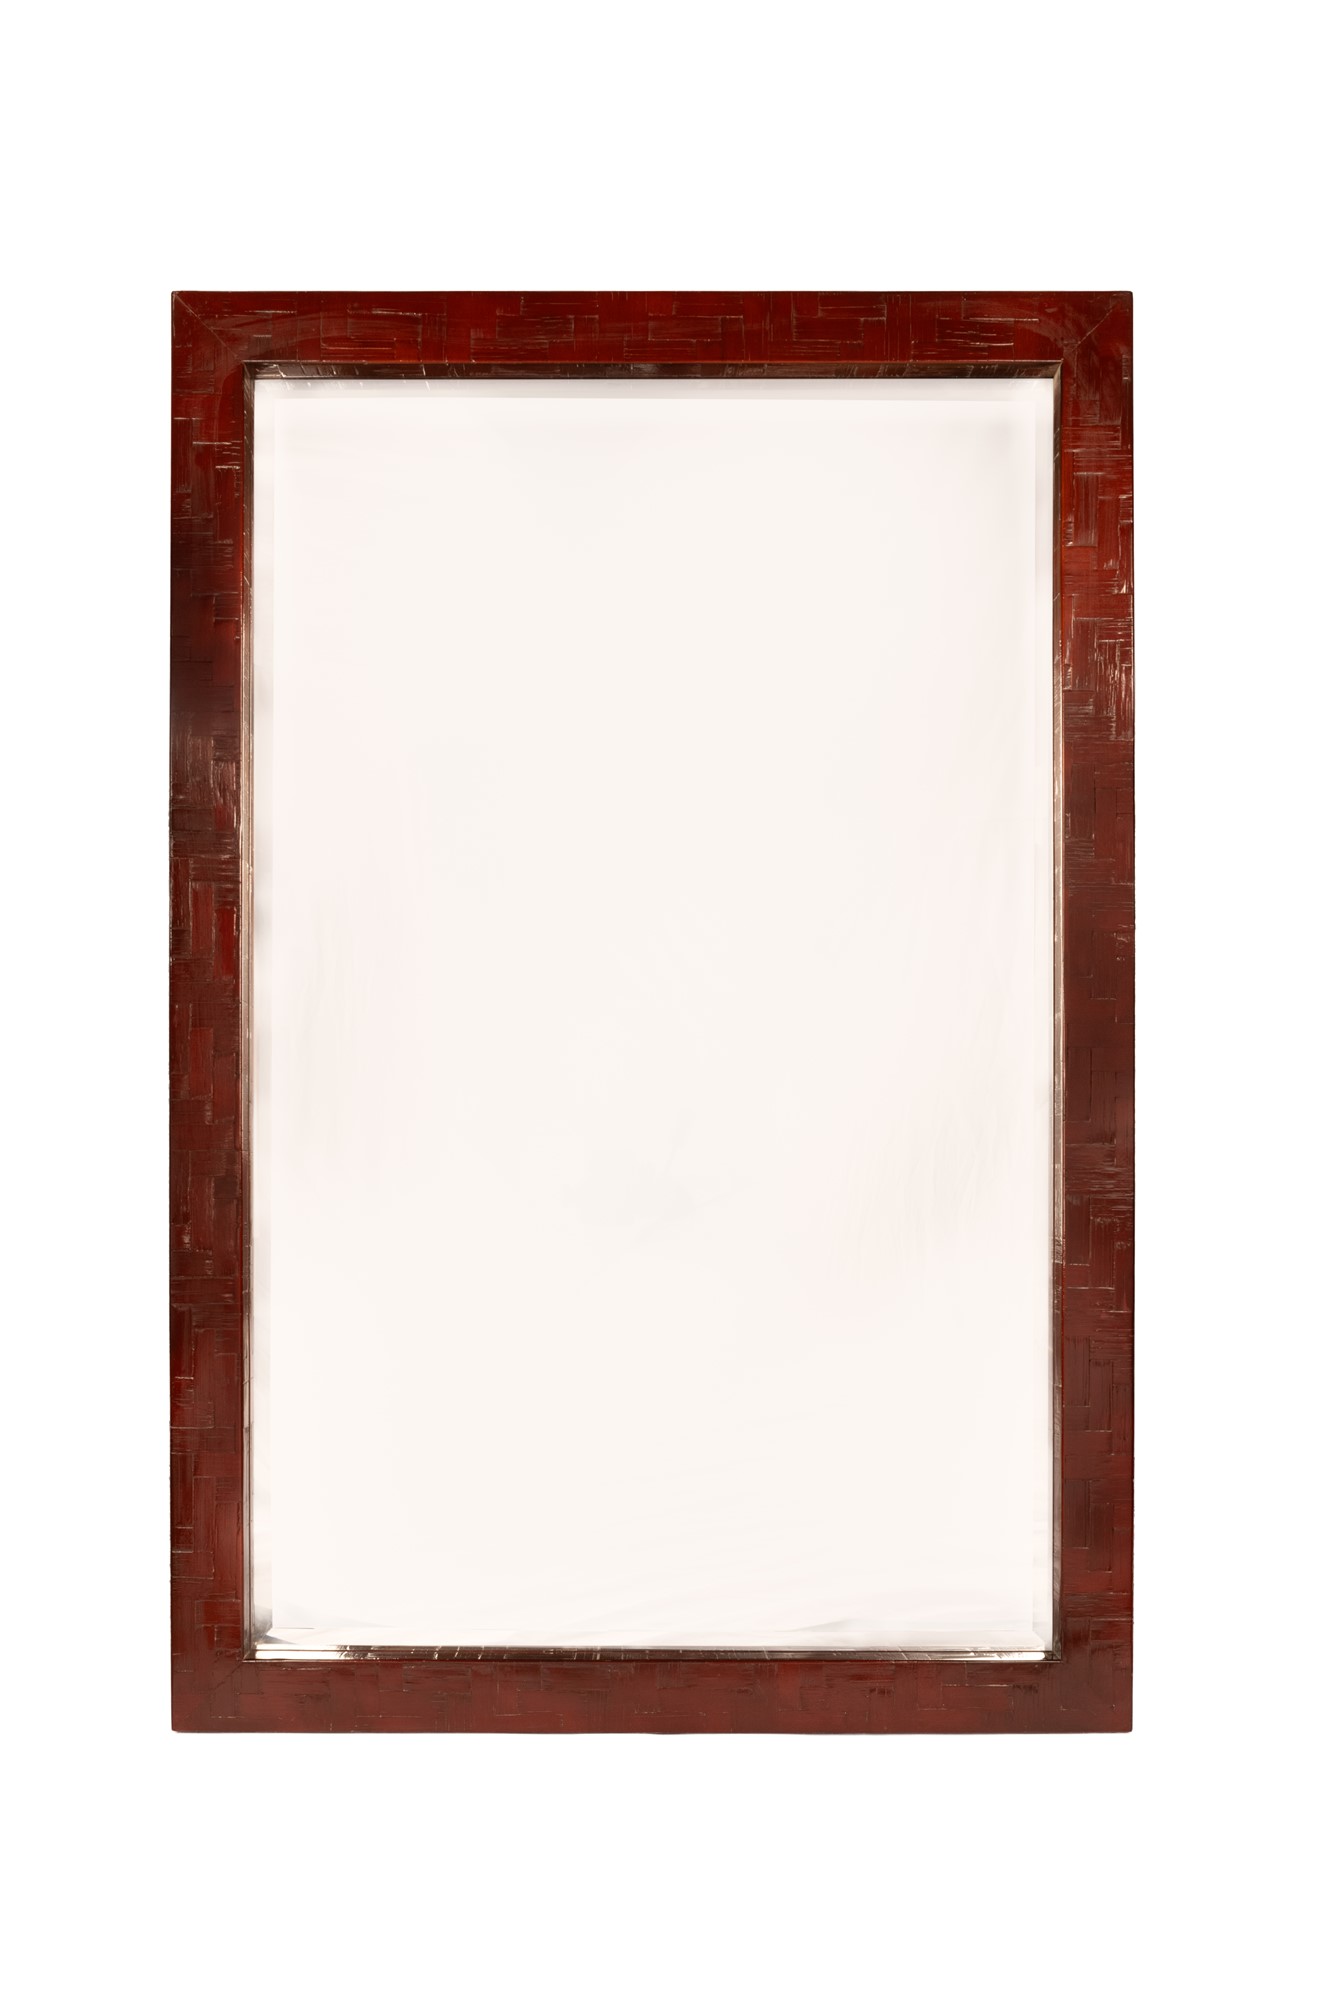 Mirror with frame in lacquered wood - Image 3 of 3